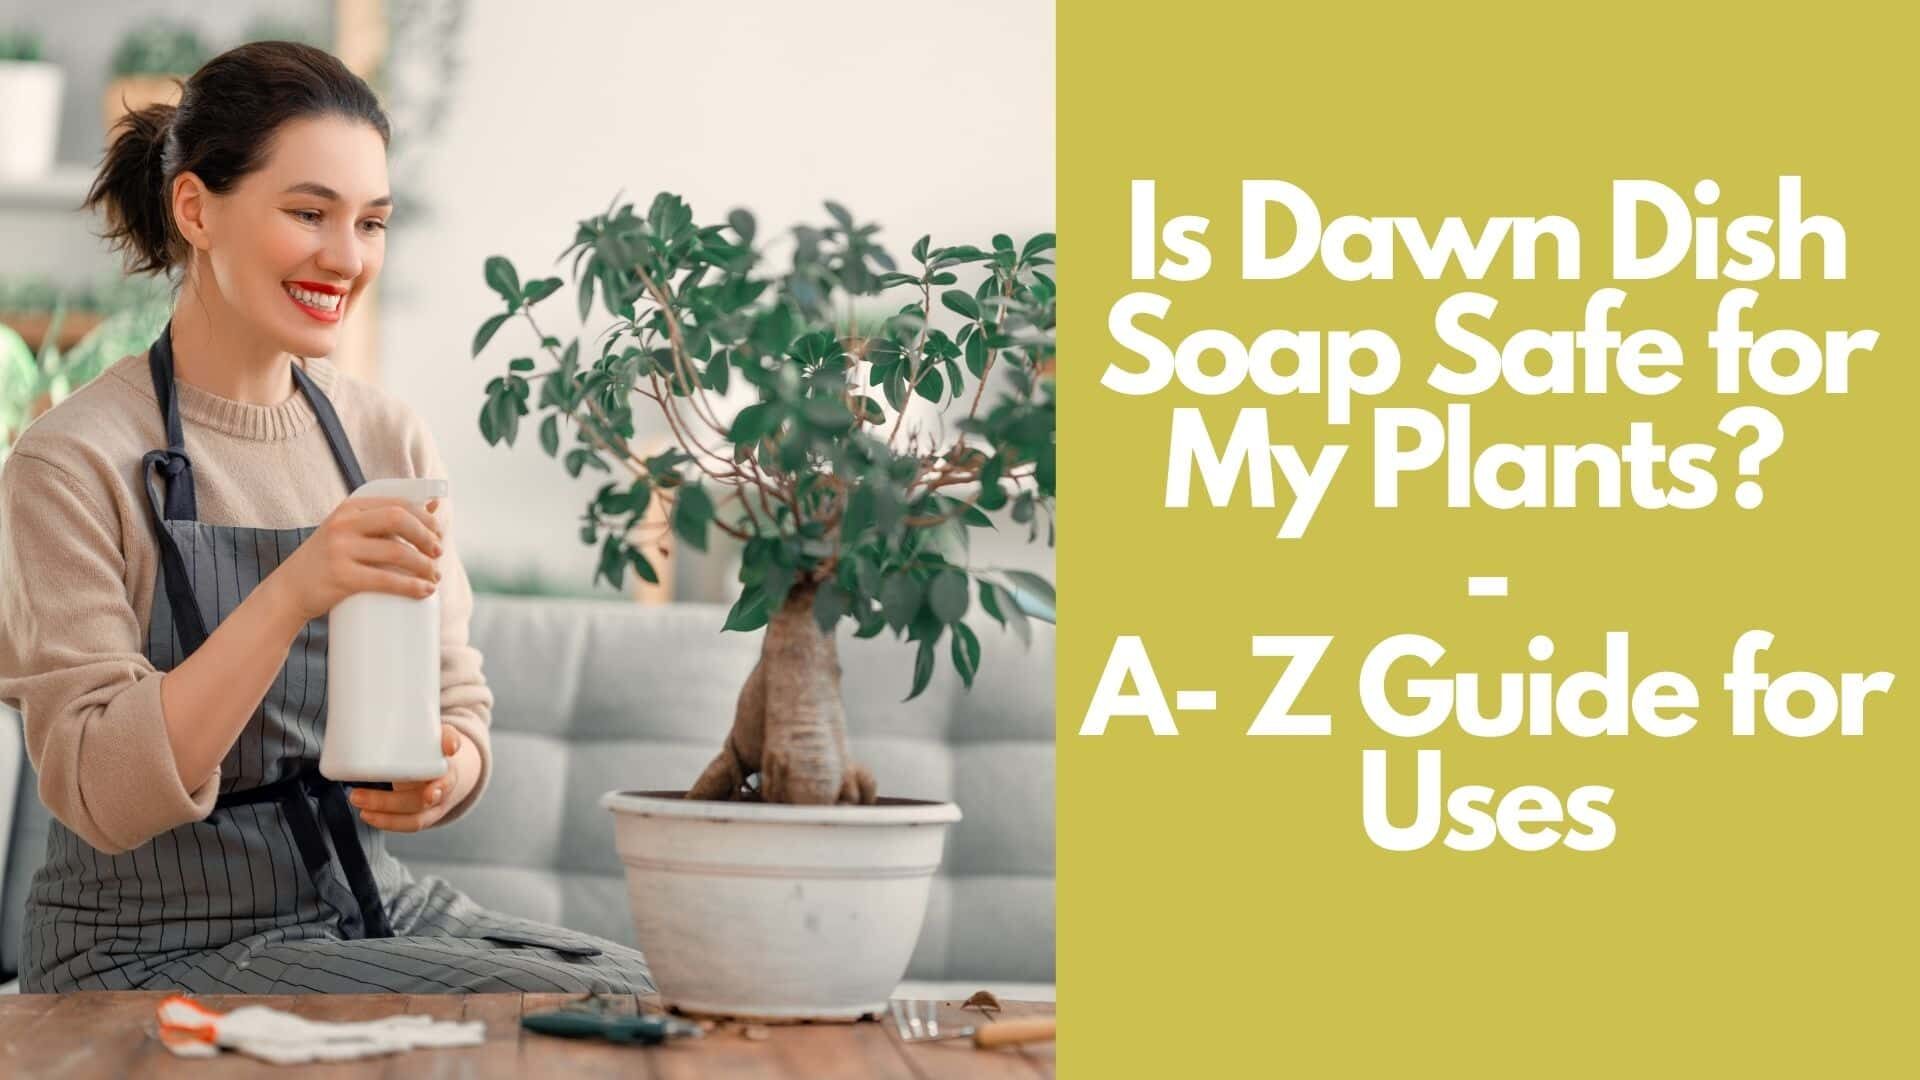 Is Dawn Dish Soap Safe for My Plants? | A- Z Guide for Uses